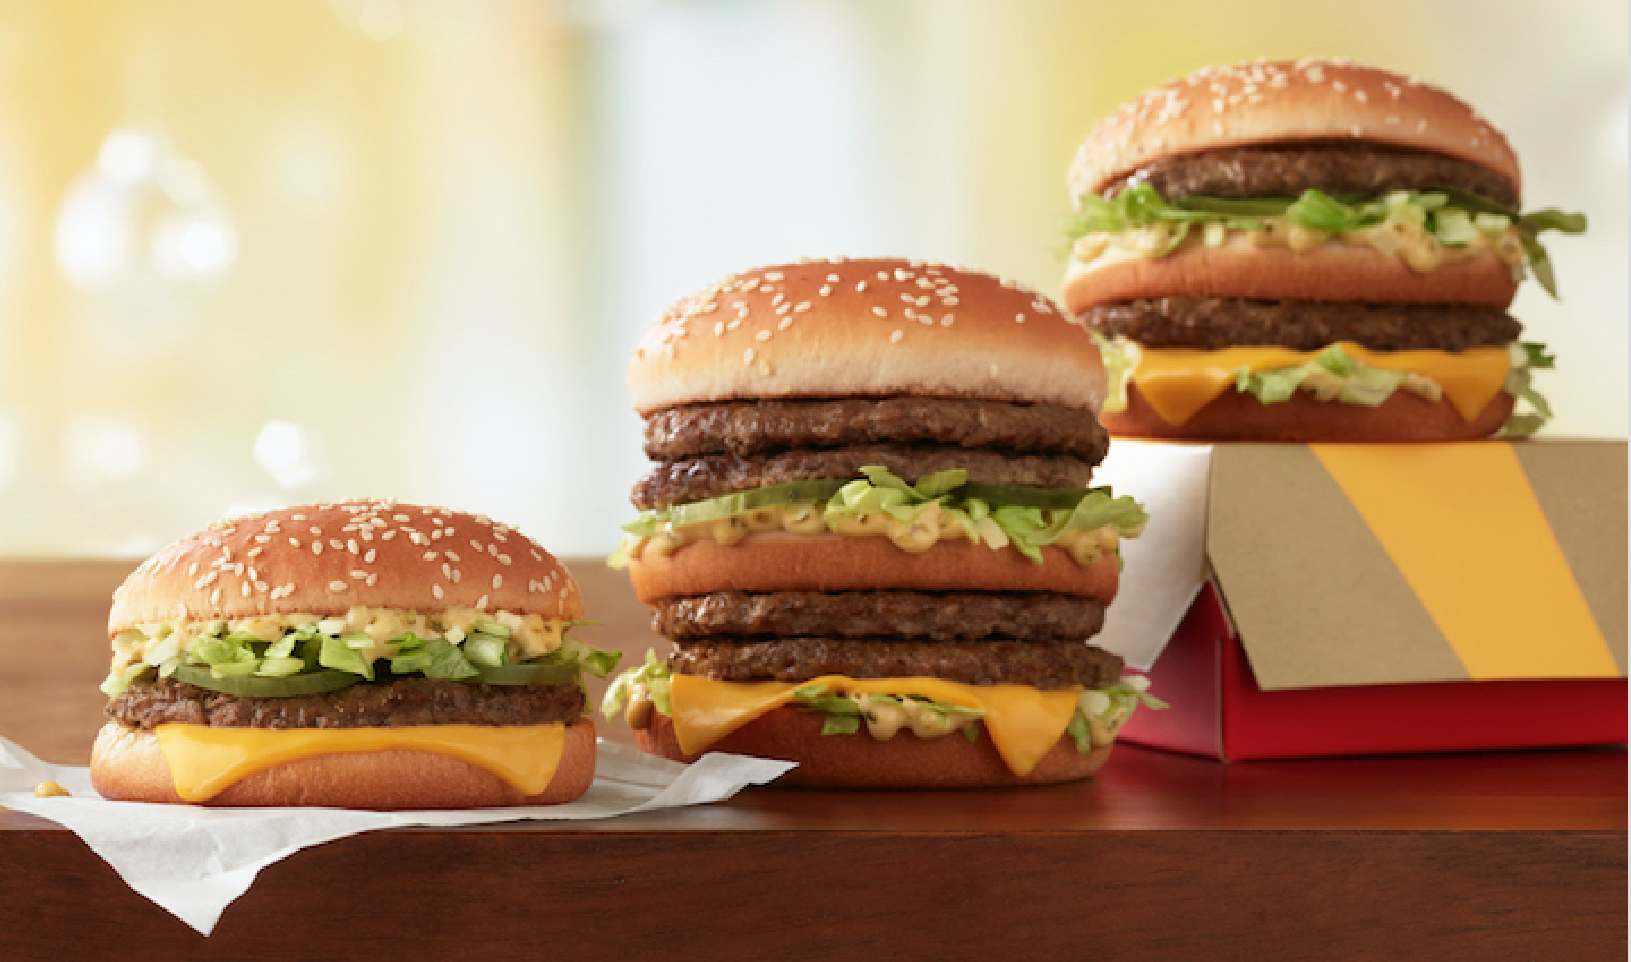 McDonald's Added 2 New Burgers To Its Line-Up: The Double Mac And Mac